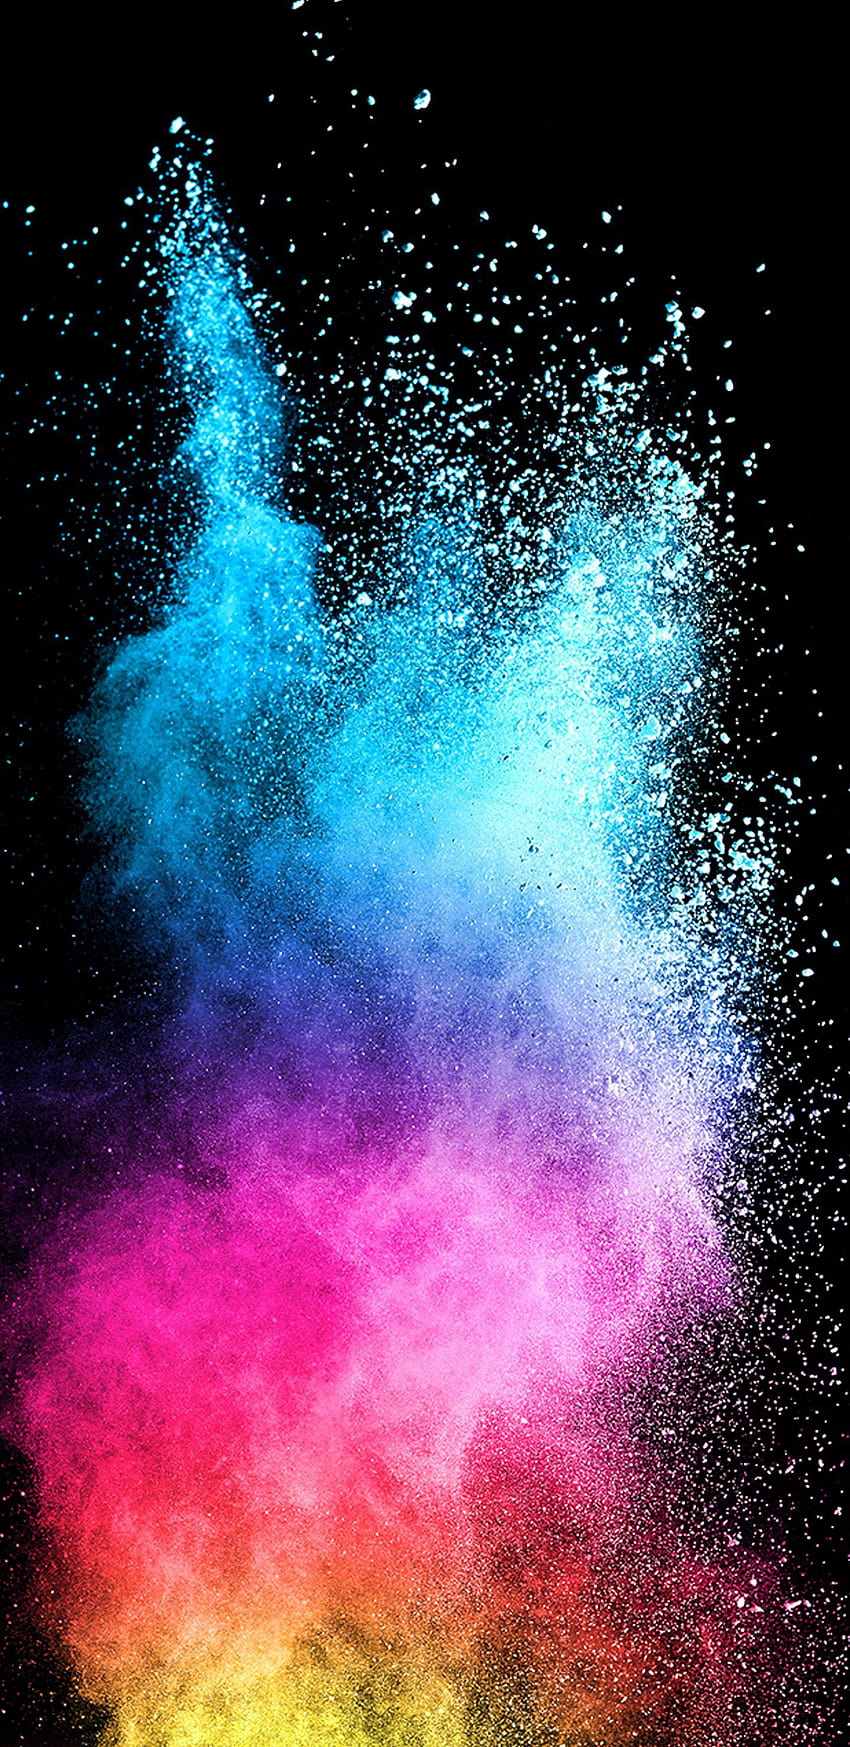 Abstract Colorful Powder with Dark Backgrounds for Samsung Galaxy, high definition samsung galaxy HD phone wallpaper